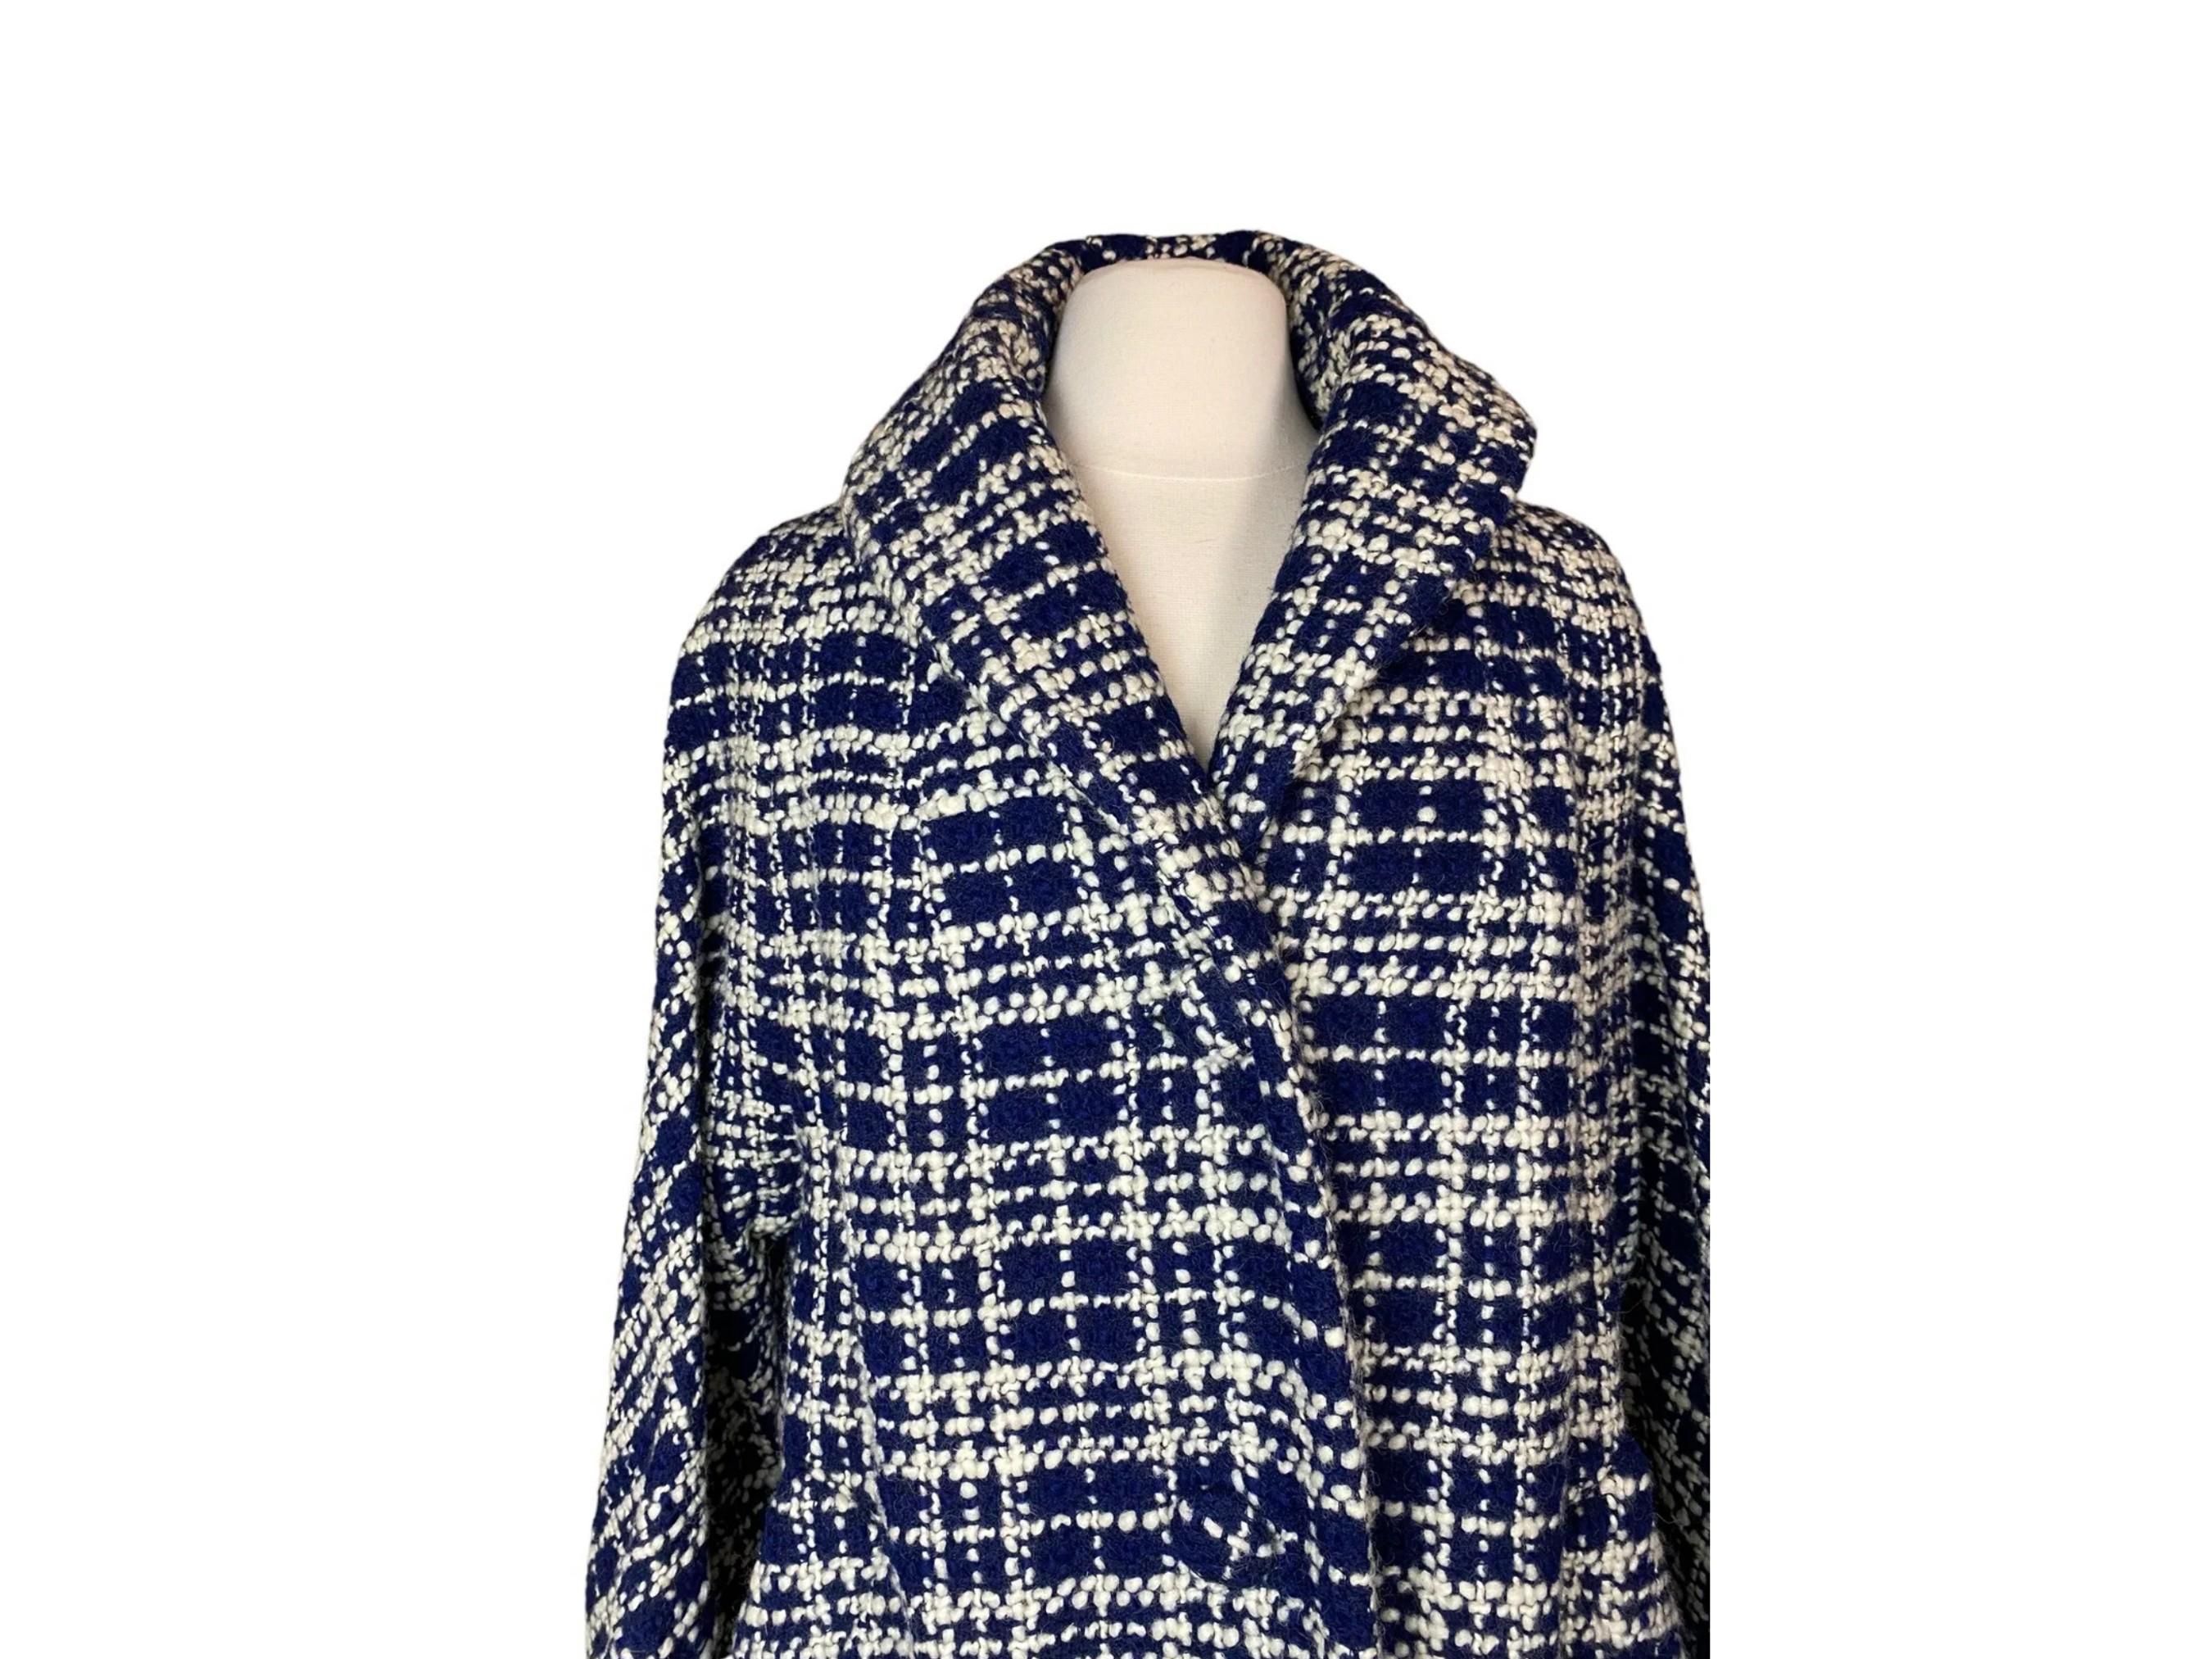 Lilli Ann 1960s Blue White Plaid Shawl Collar Wool Swing Coat MED/LG In Excellent Condition For Sale In North Attleboro, MA